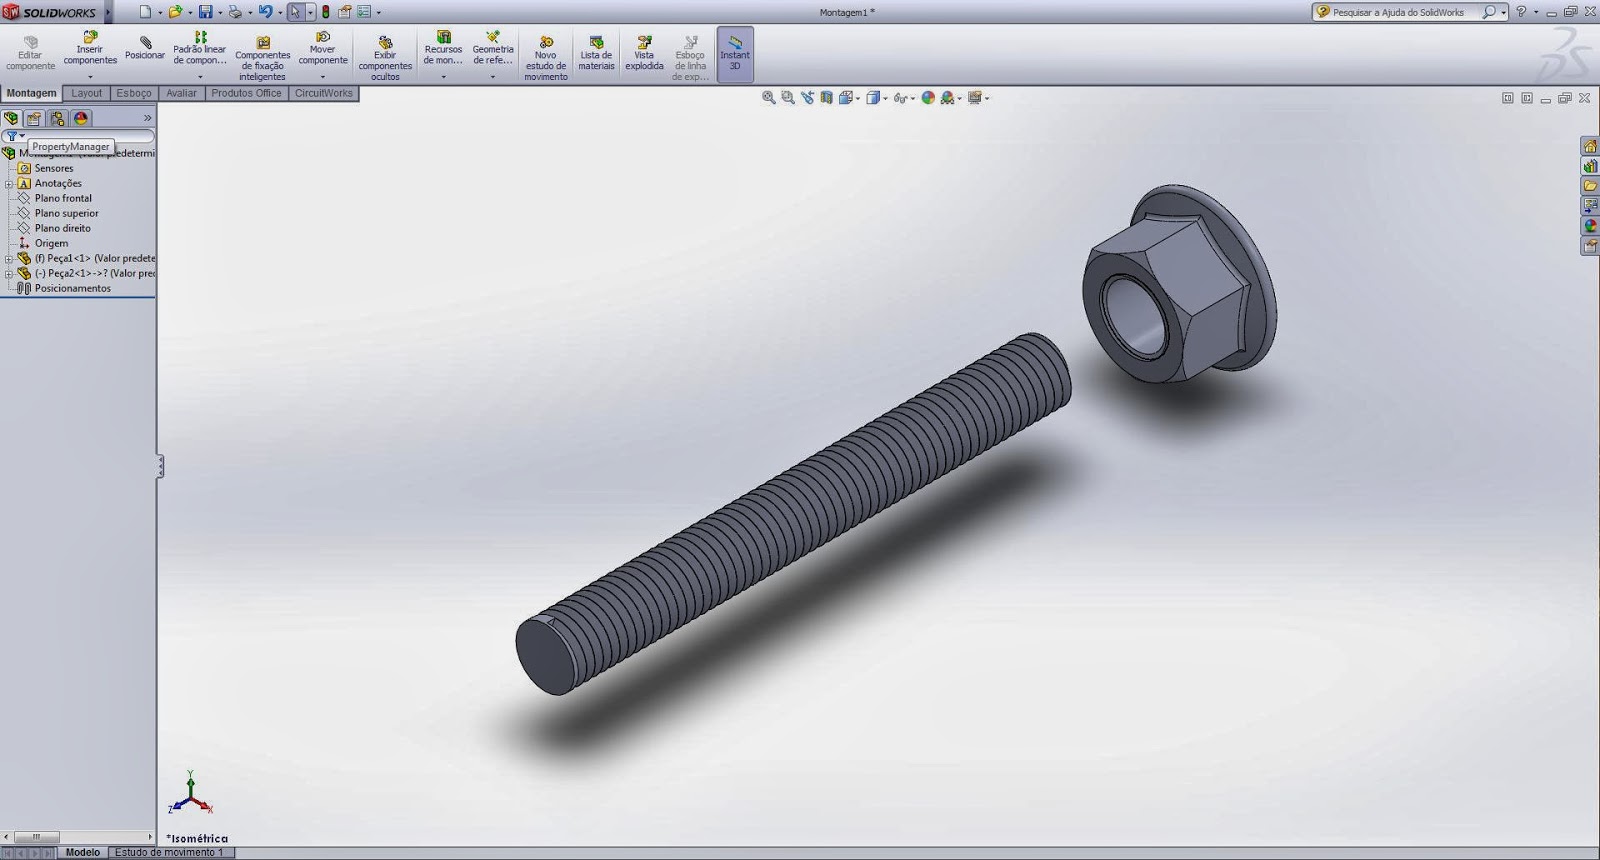 parafuso solidworks download